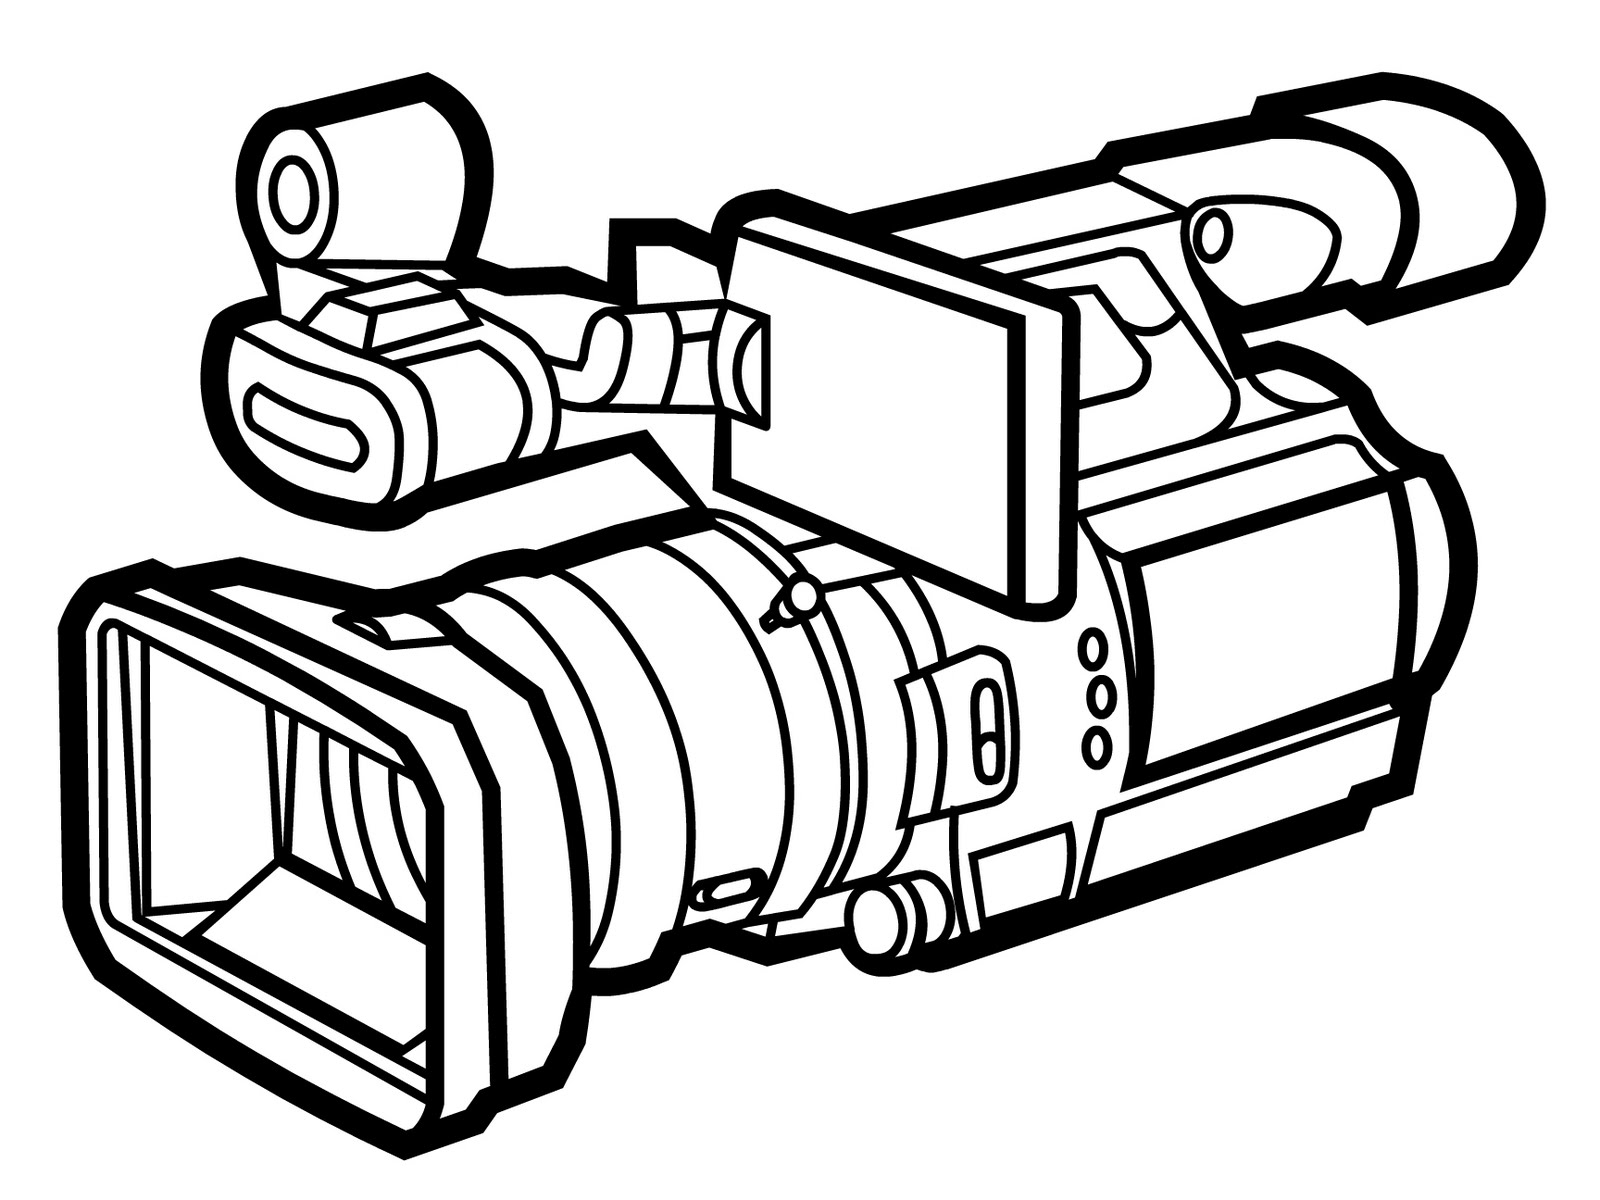 Image of video camera clipart